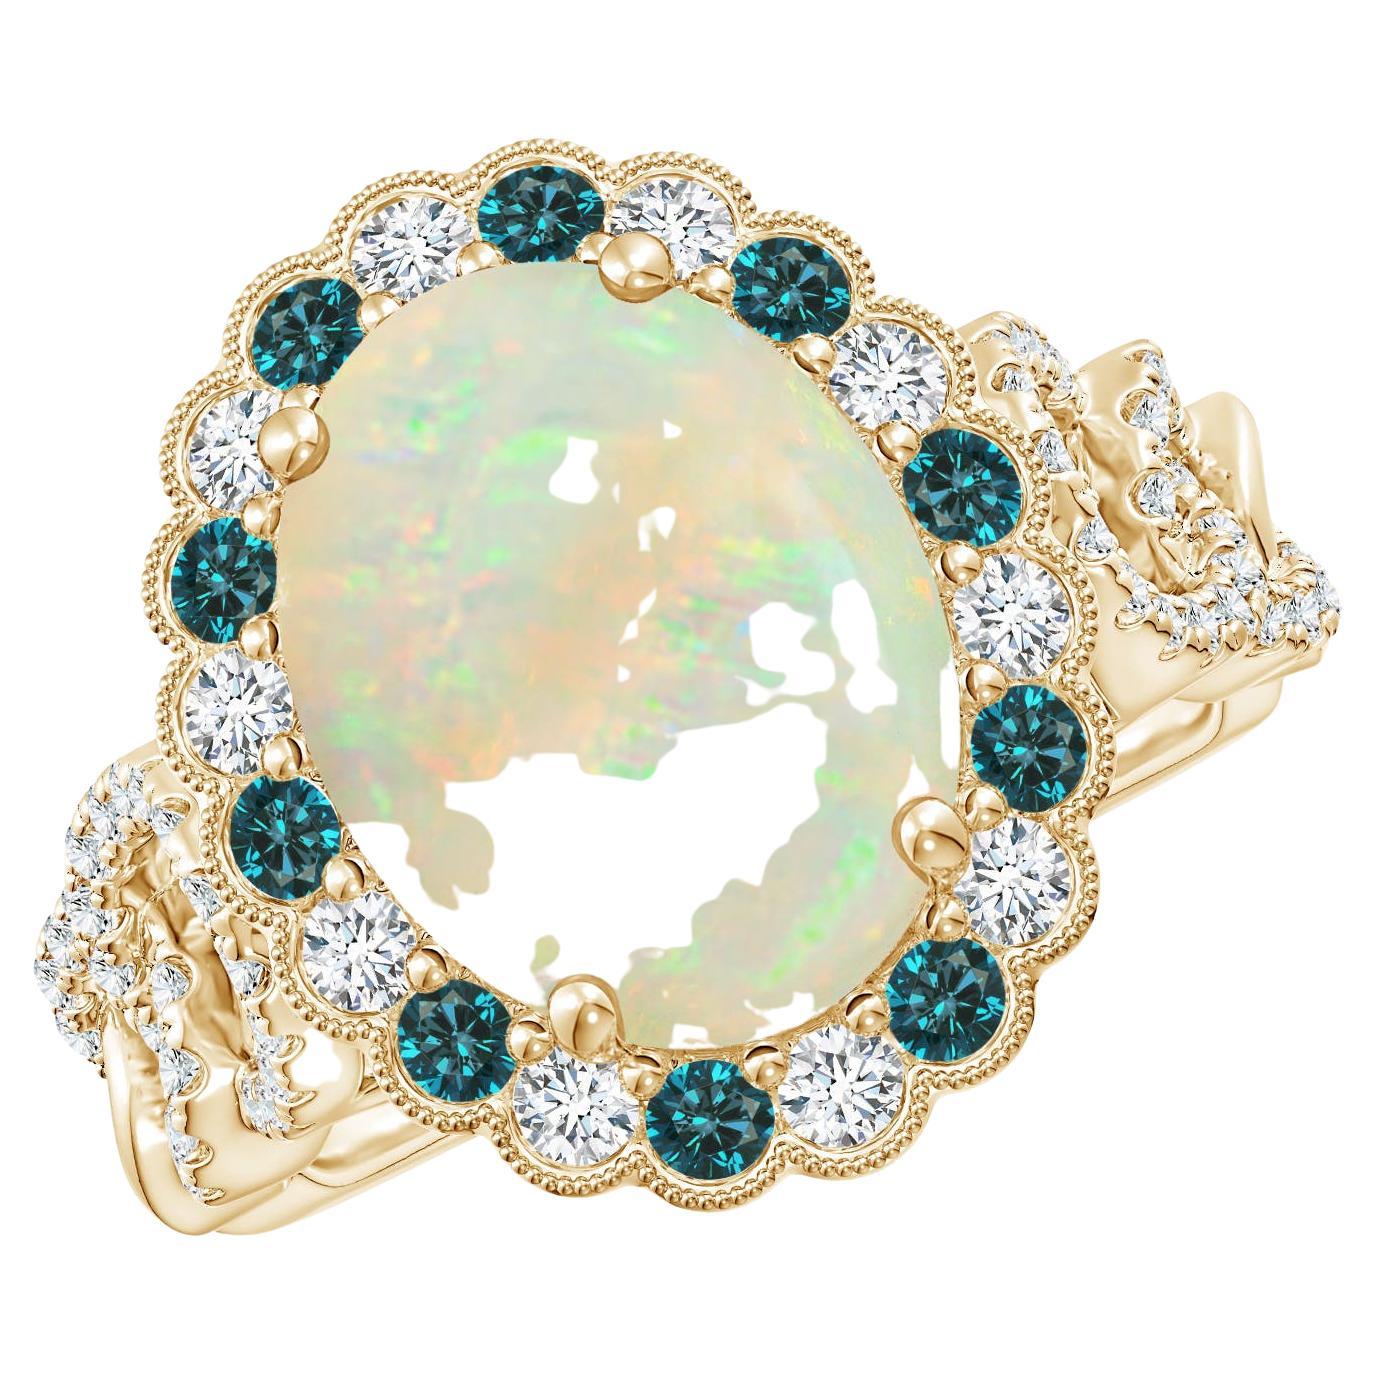 For Sale:  GIA Certified Natural Opal Ring in Yellow Gold with Blue & White Diamonds